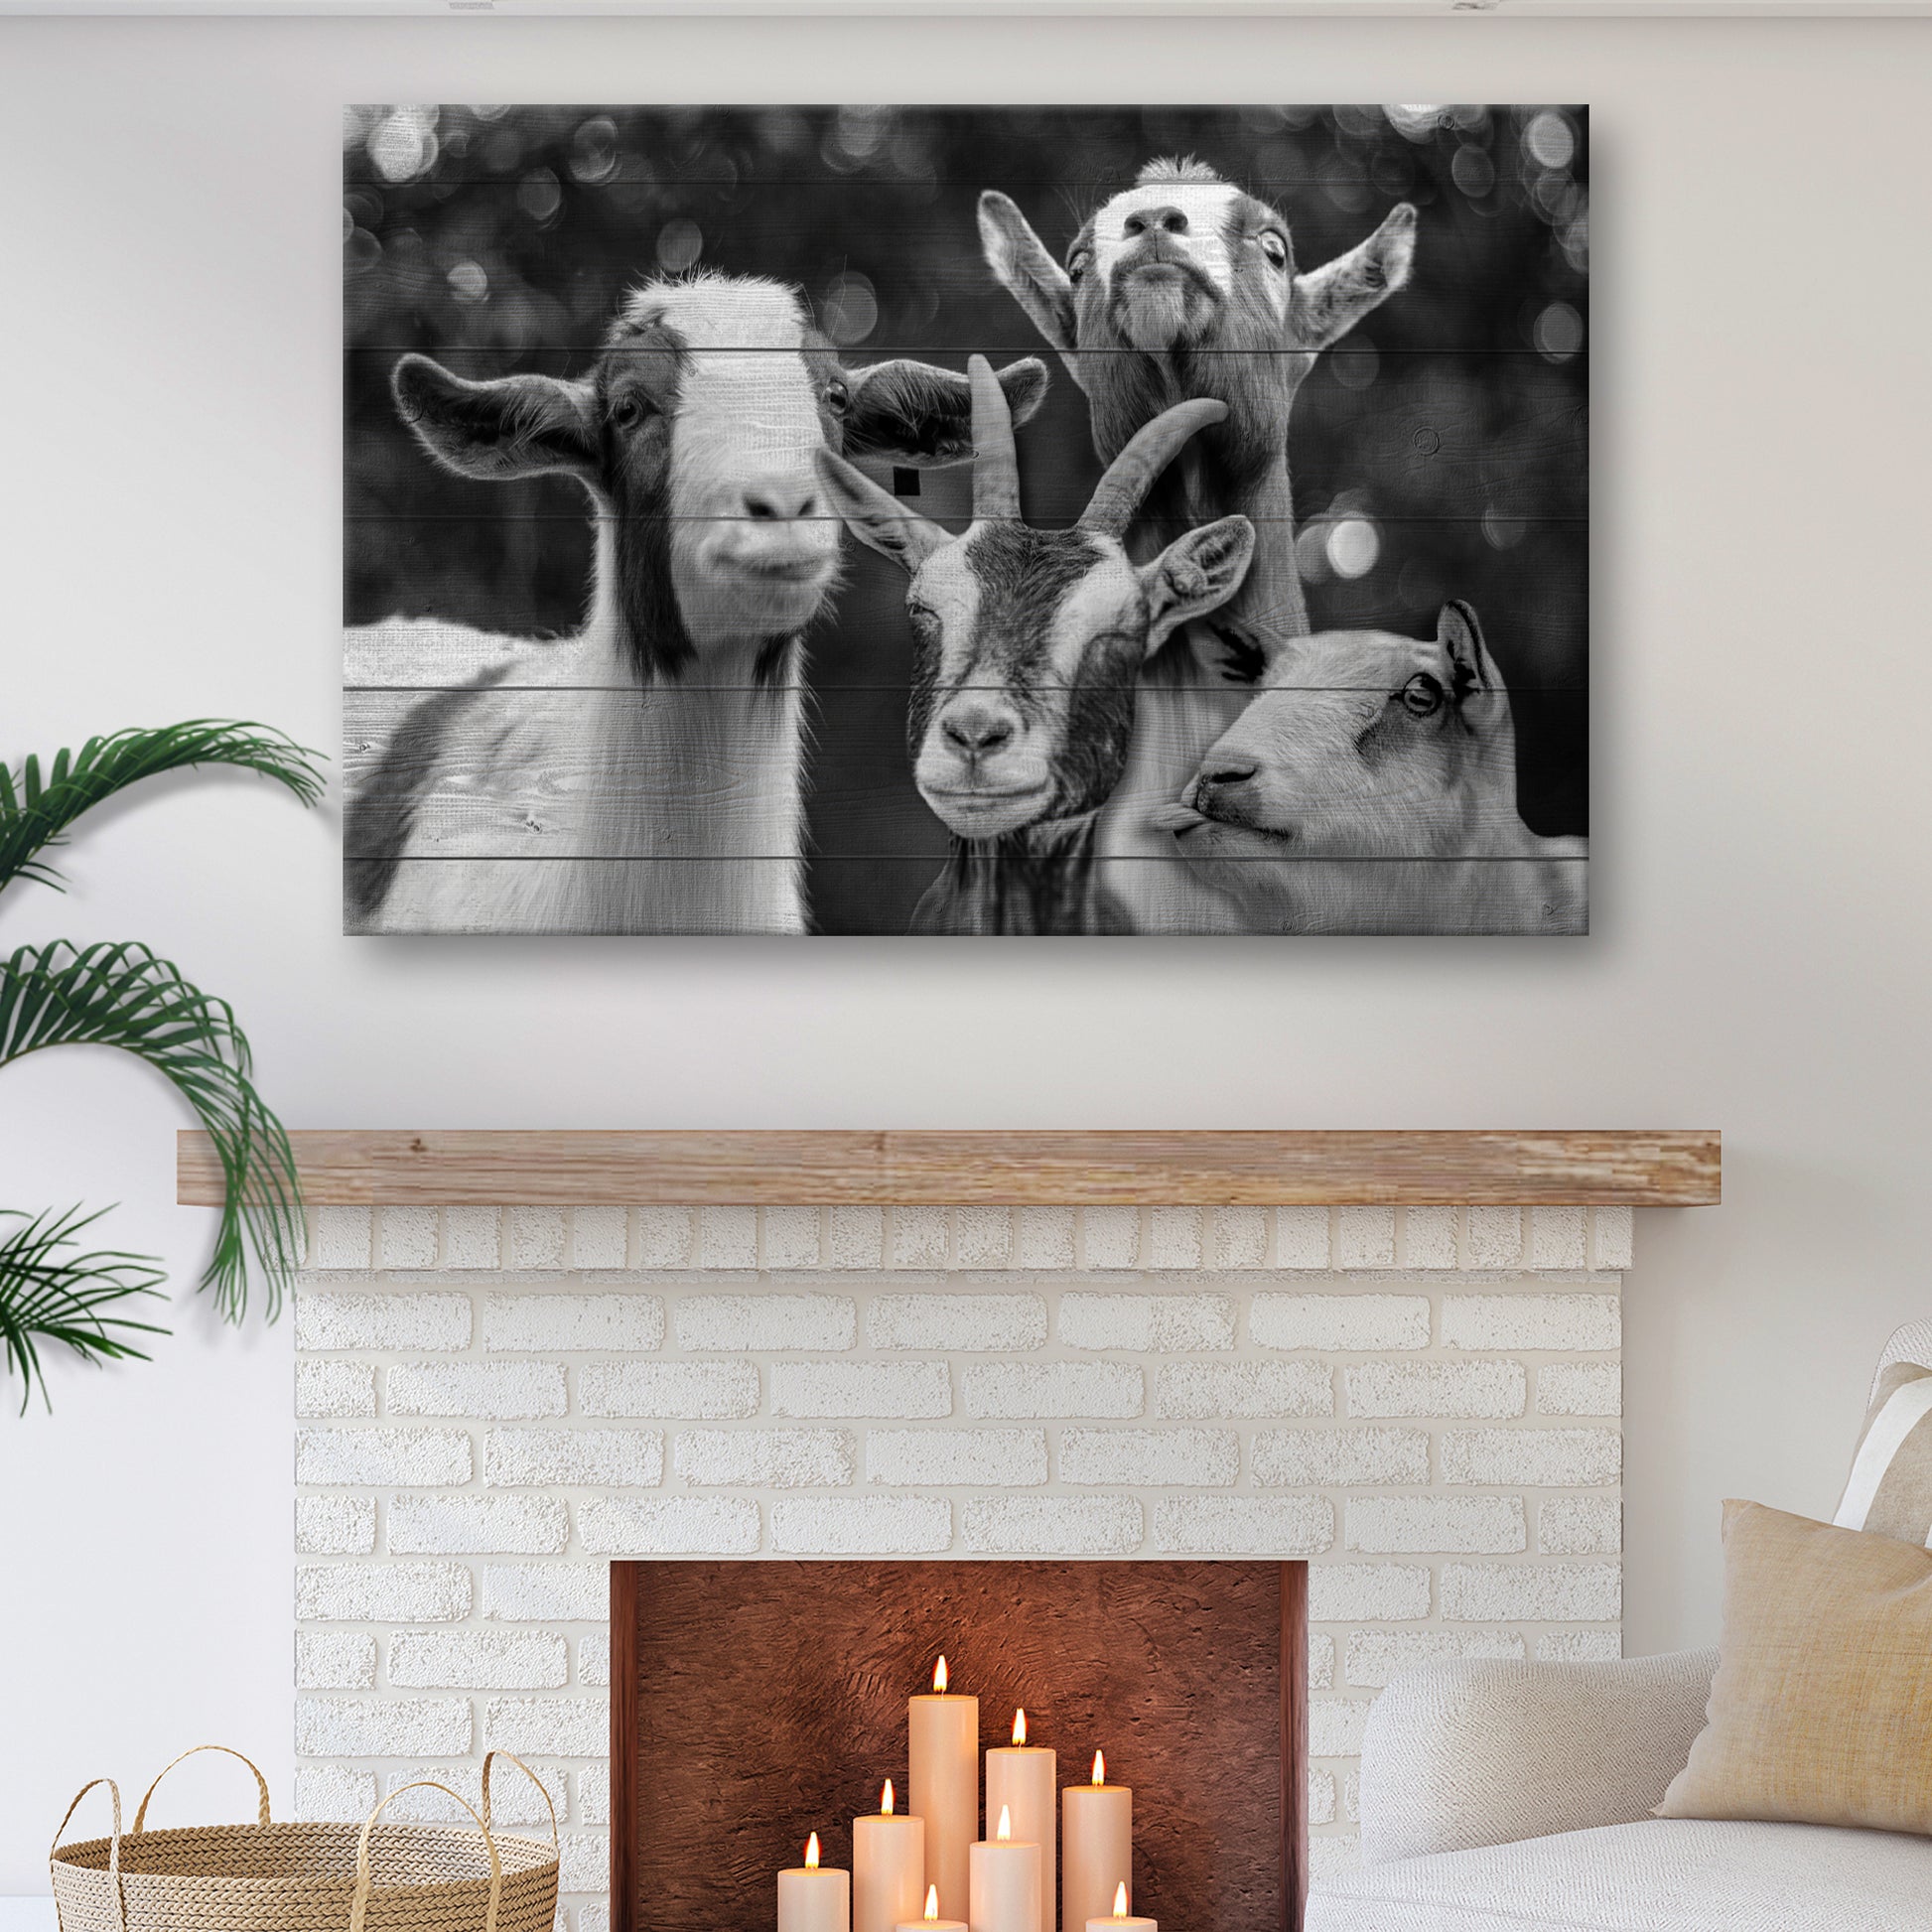 Cheerful Goats Canvas Wall Art - Image by Tailored Canvases